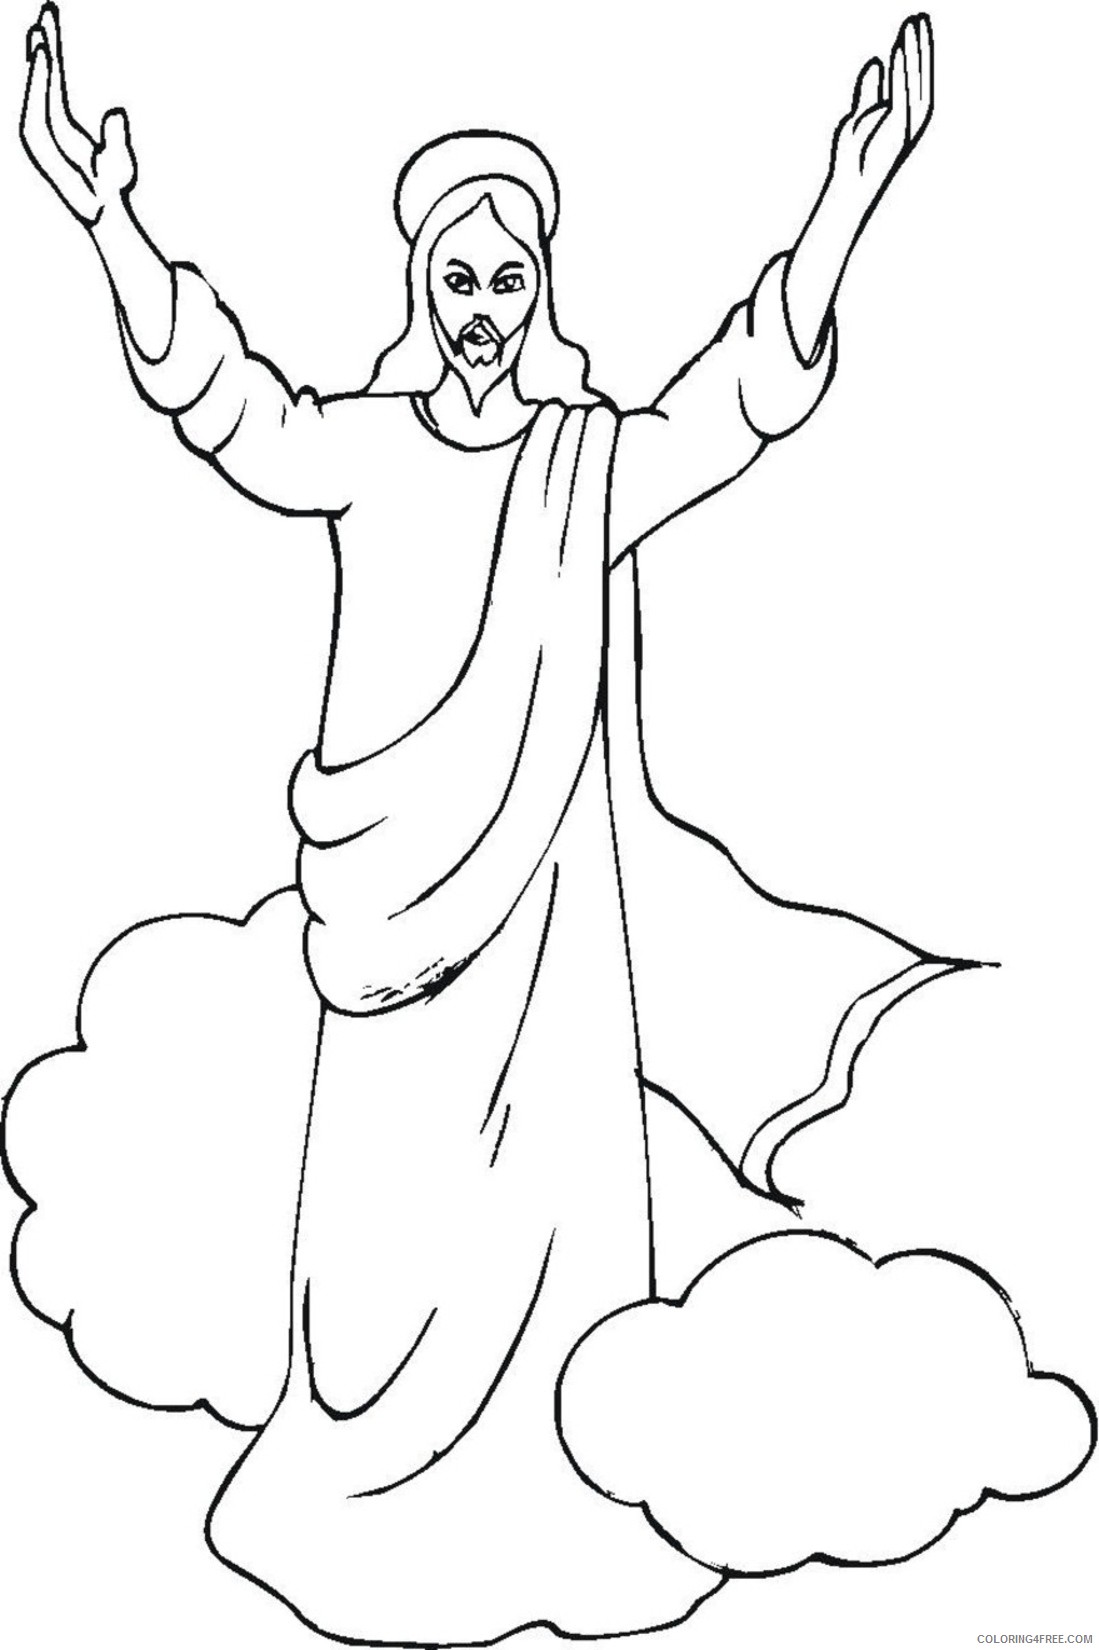 religious coloring pages jesus Coloring4free